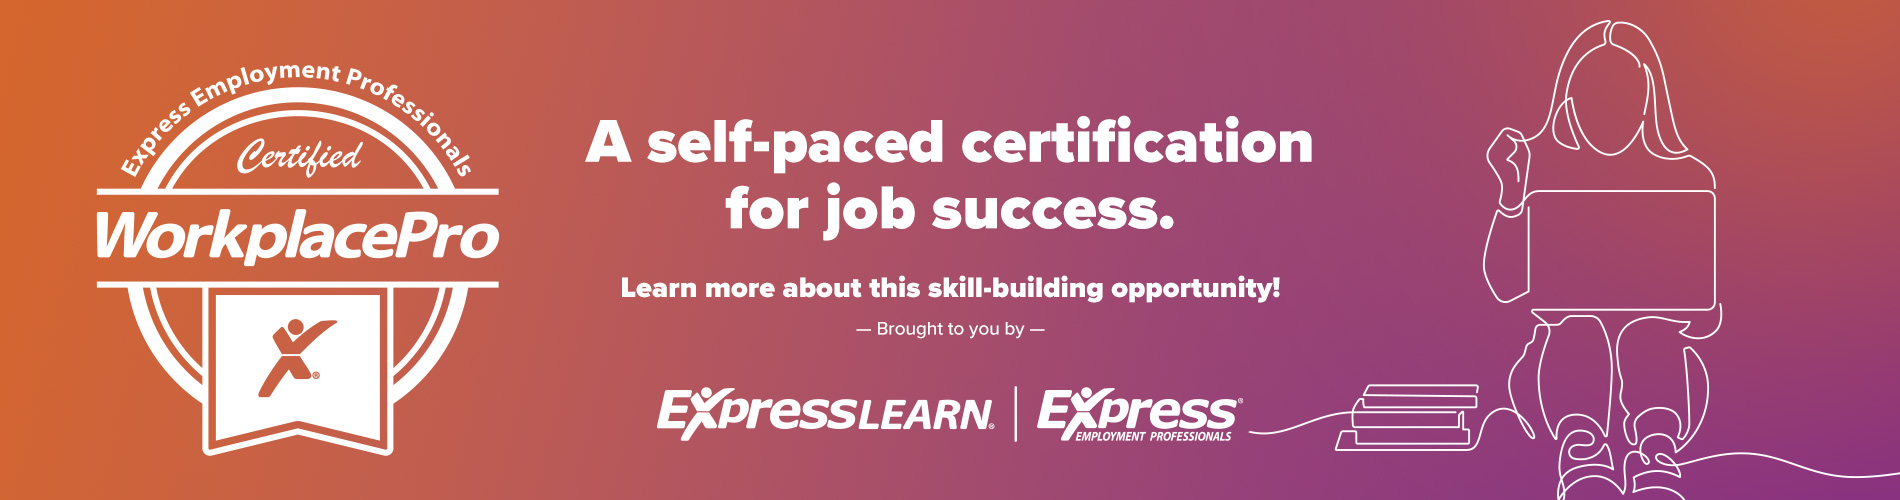 Workplace Pro - Express Employment Professionals